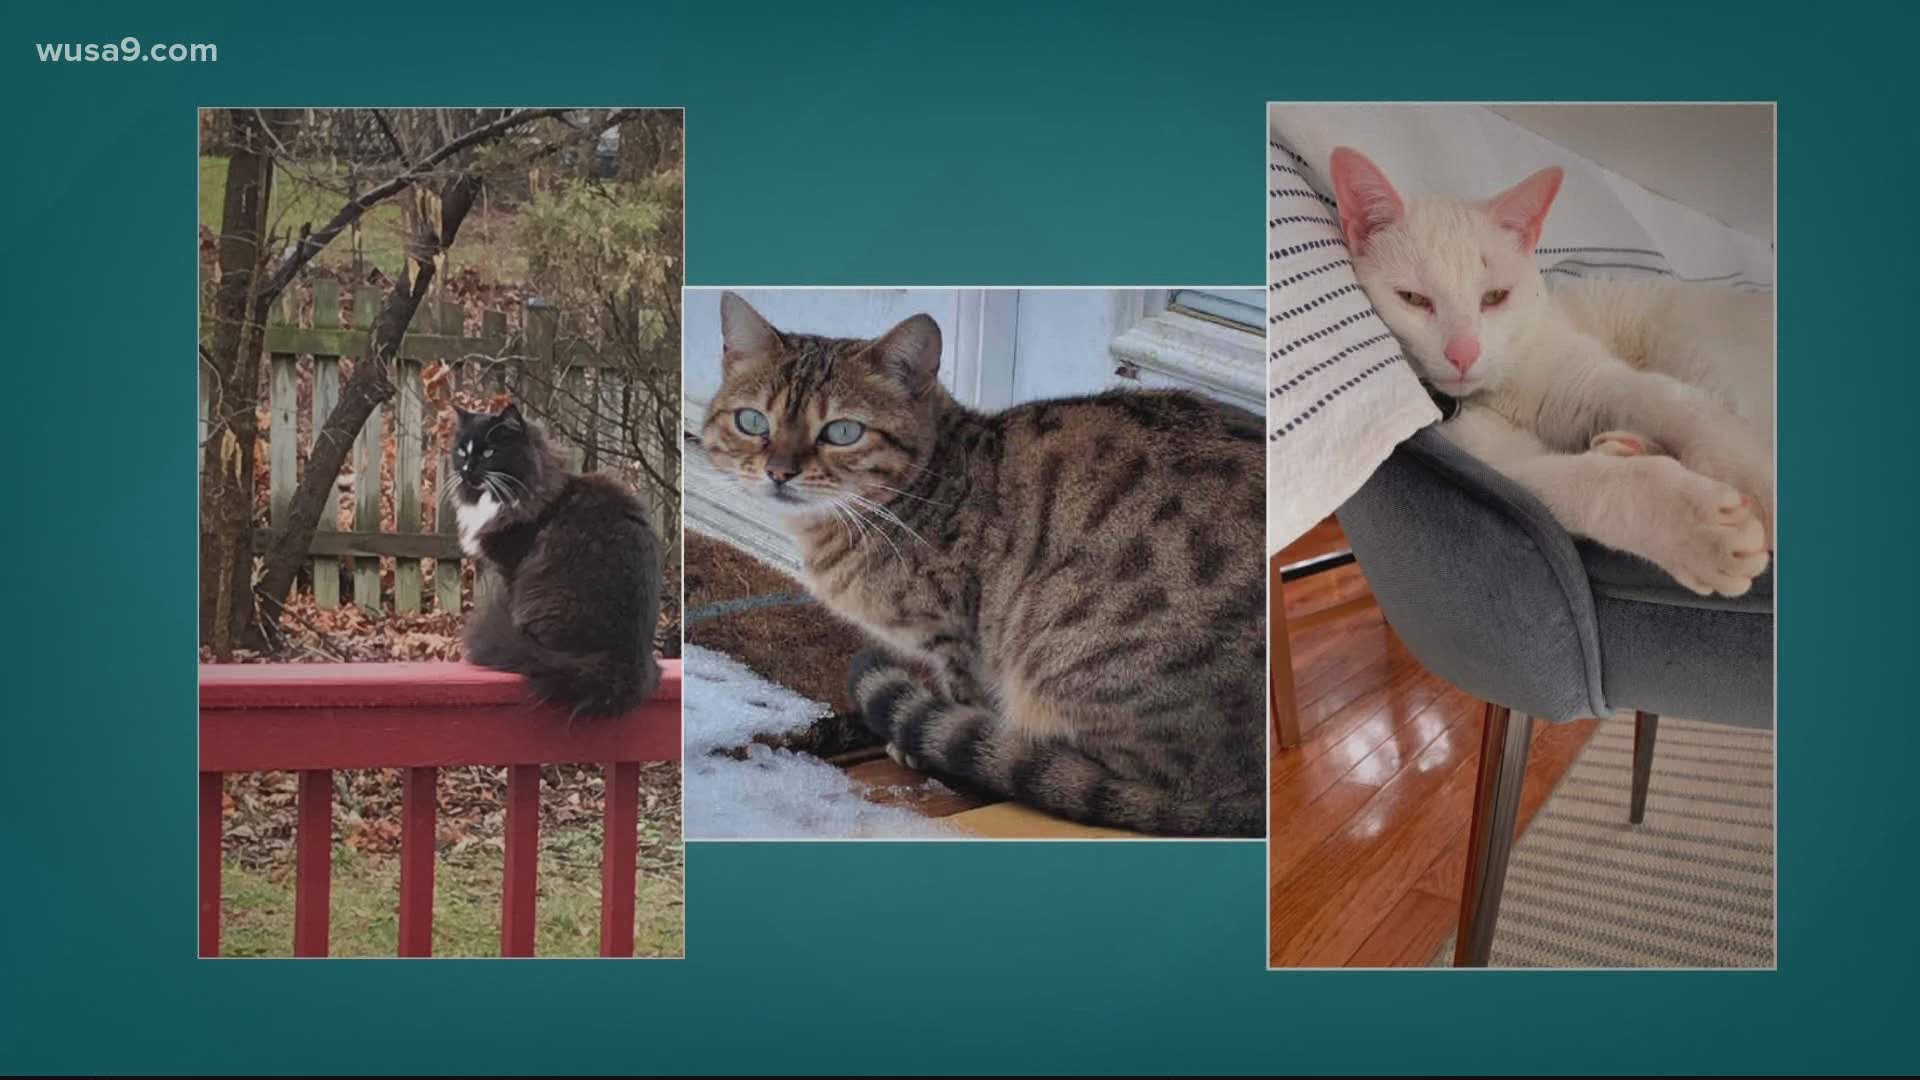 According to Loudoun County Animal Services, three pet cats have been shot within a month and could be in relation to the pandemic.